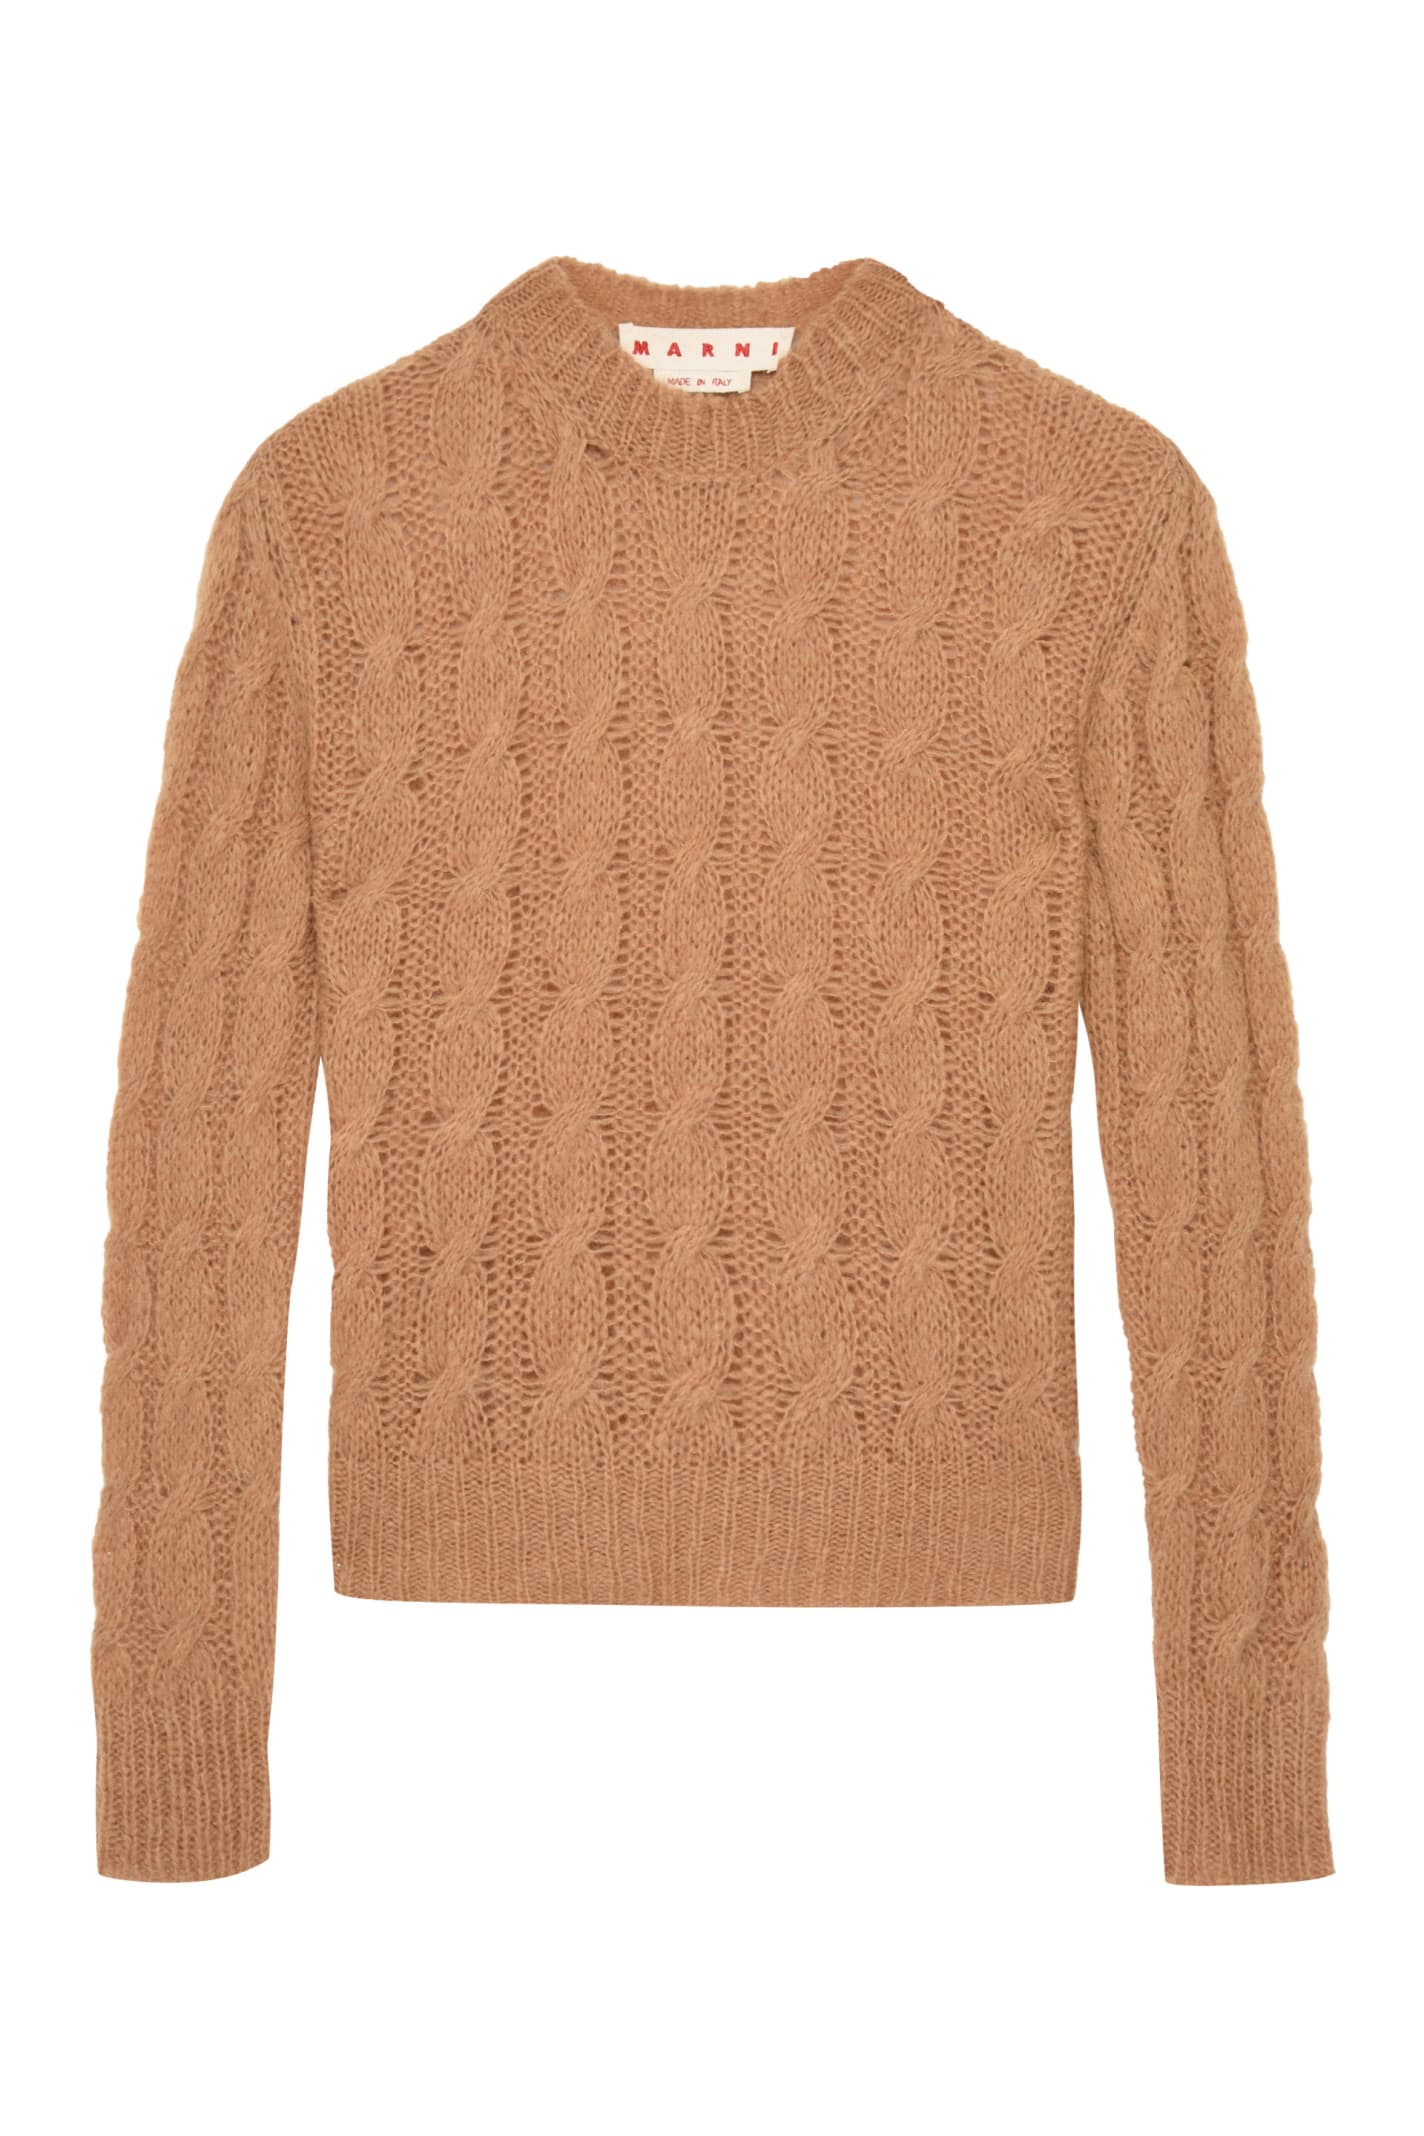 Marni Cable Knit Pullover